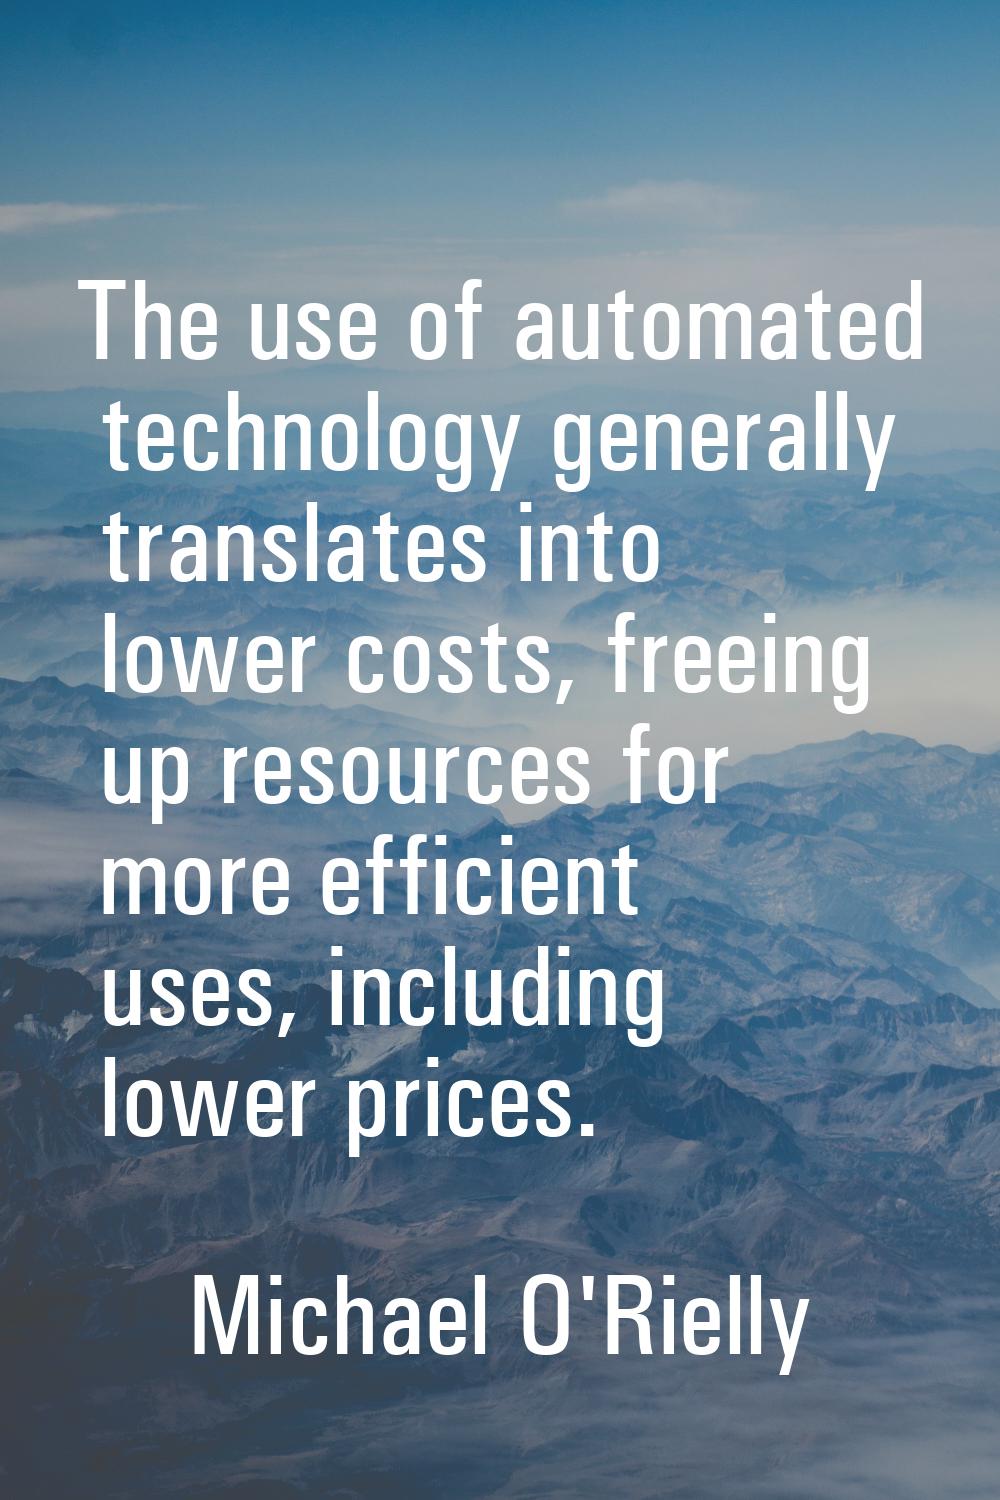 The use of automated technology generally translates into lower costs, freeing up resources for mor